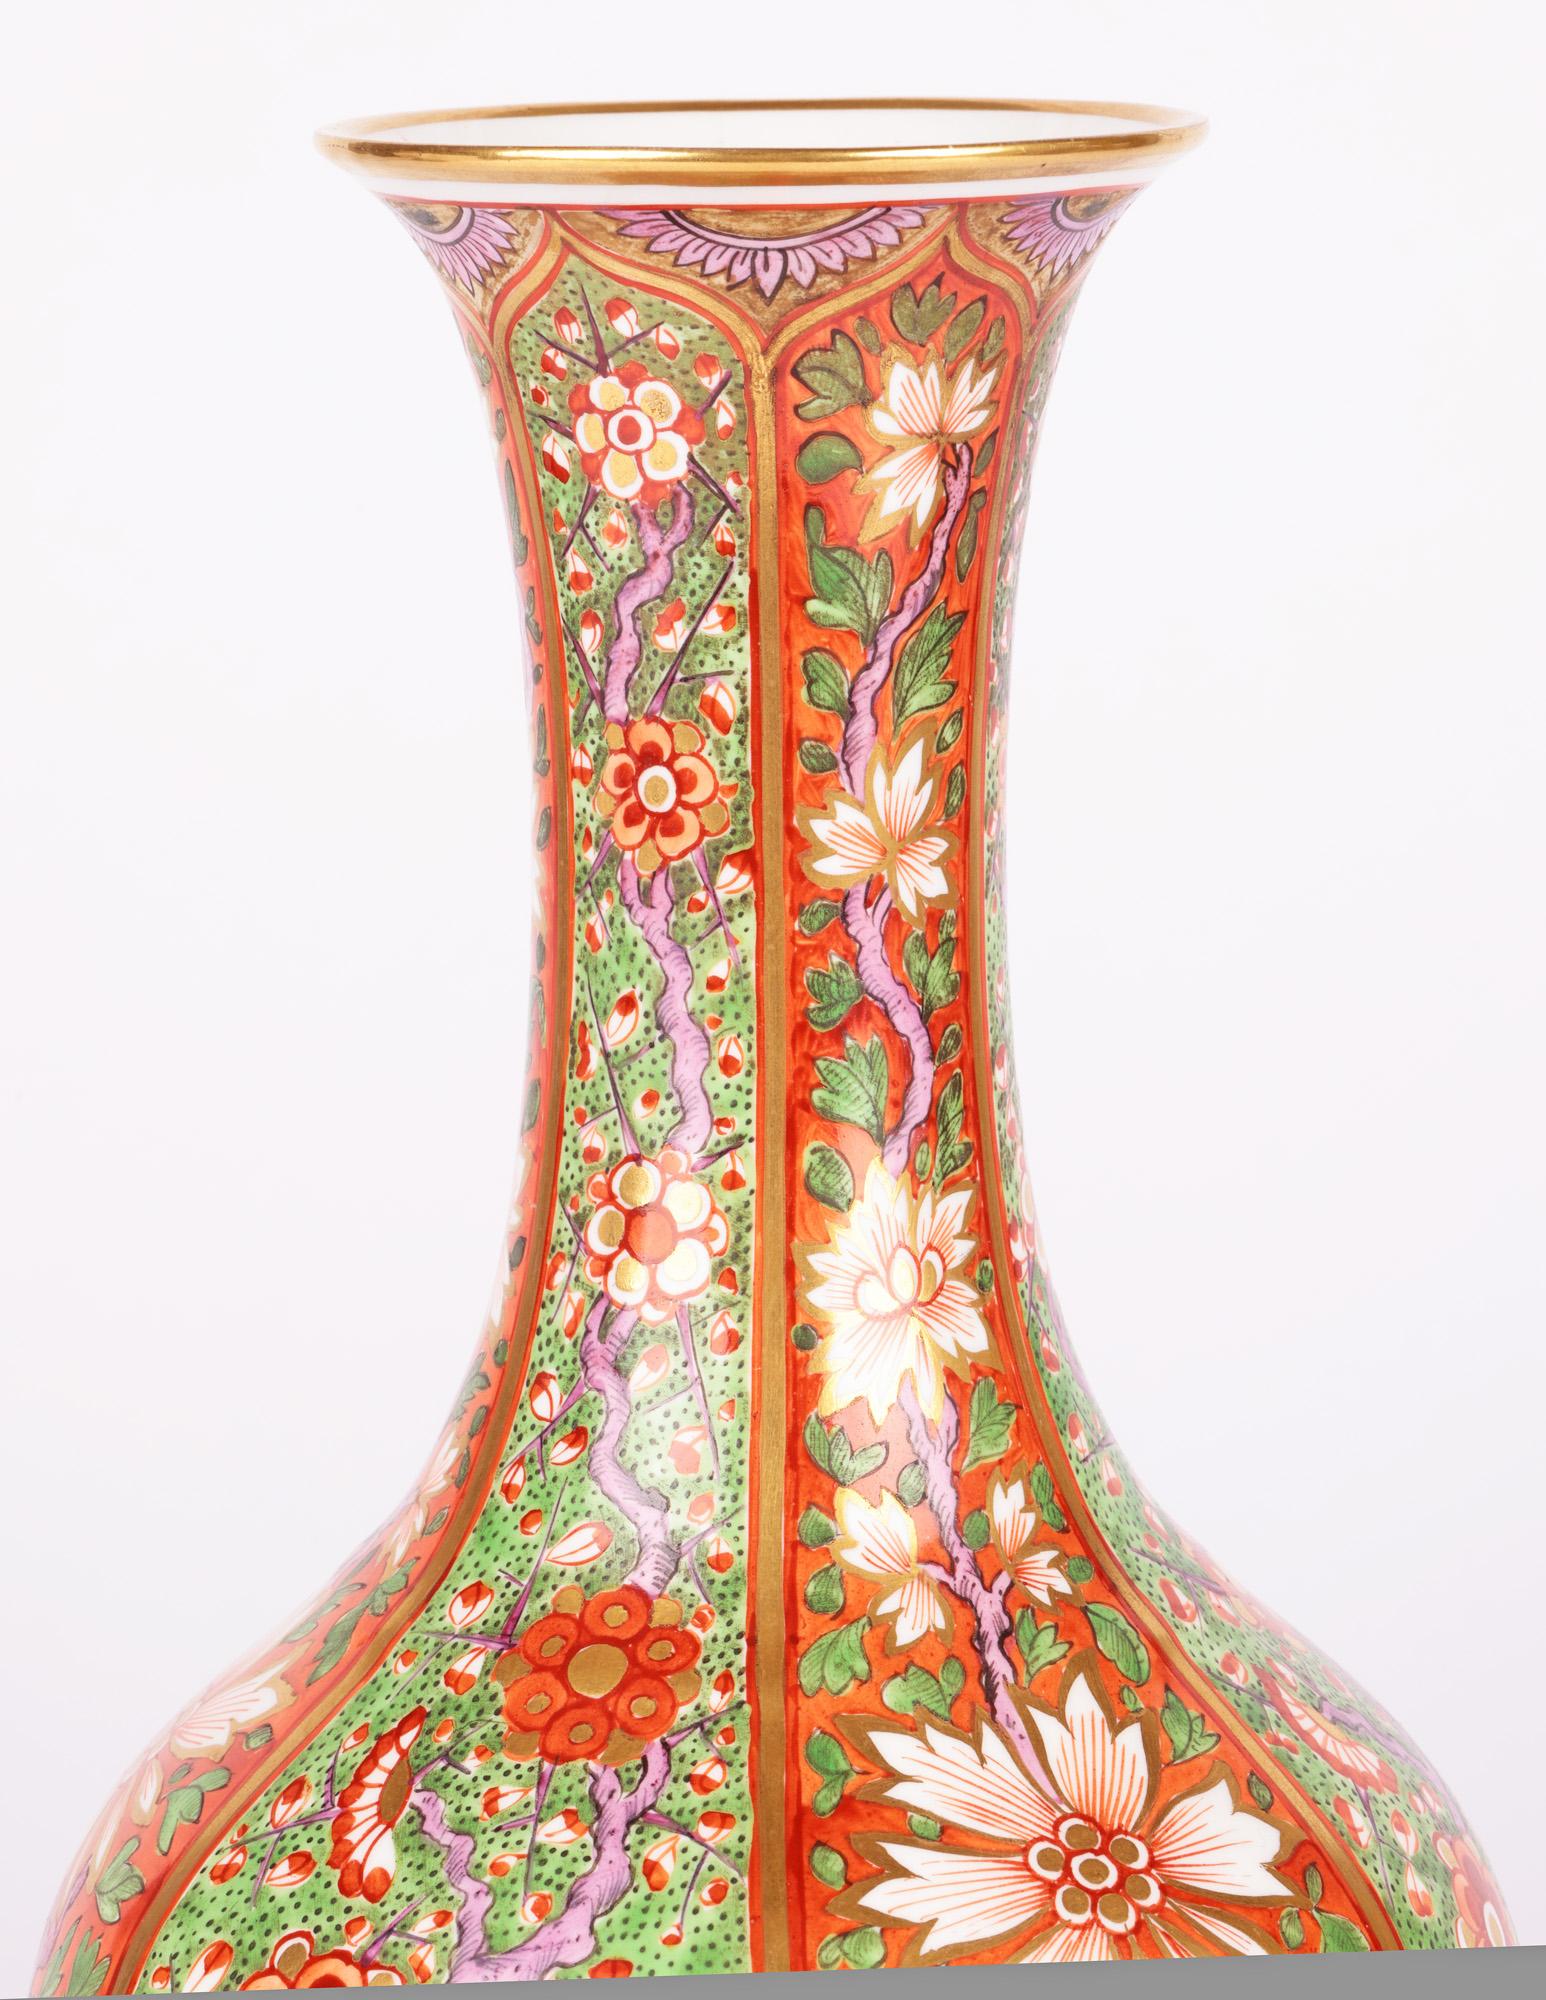 A stunning and exceptional late Georgian floral painted porcelain bottle vase made by Derby and dating from around 1820. The large vase stands on a narrow round foot with slightly recessed base and has a round bulbous body with a tall slender neck